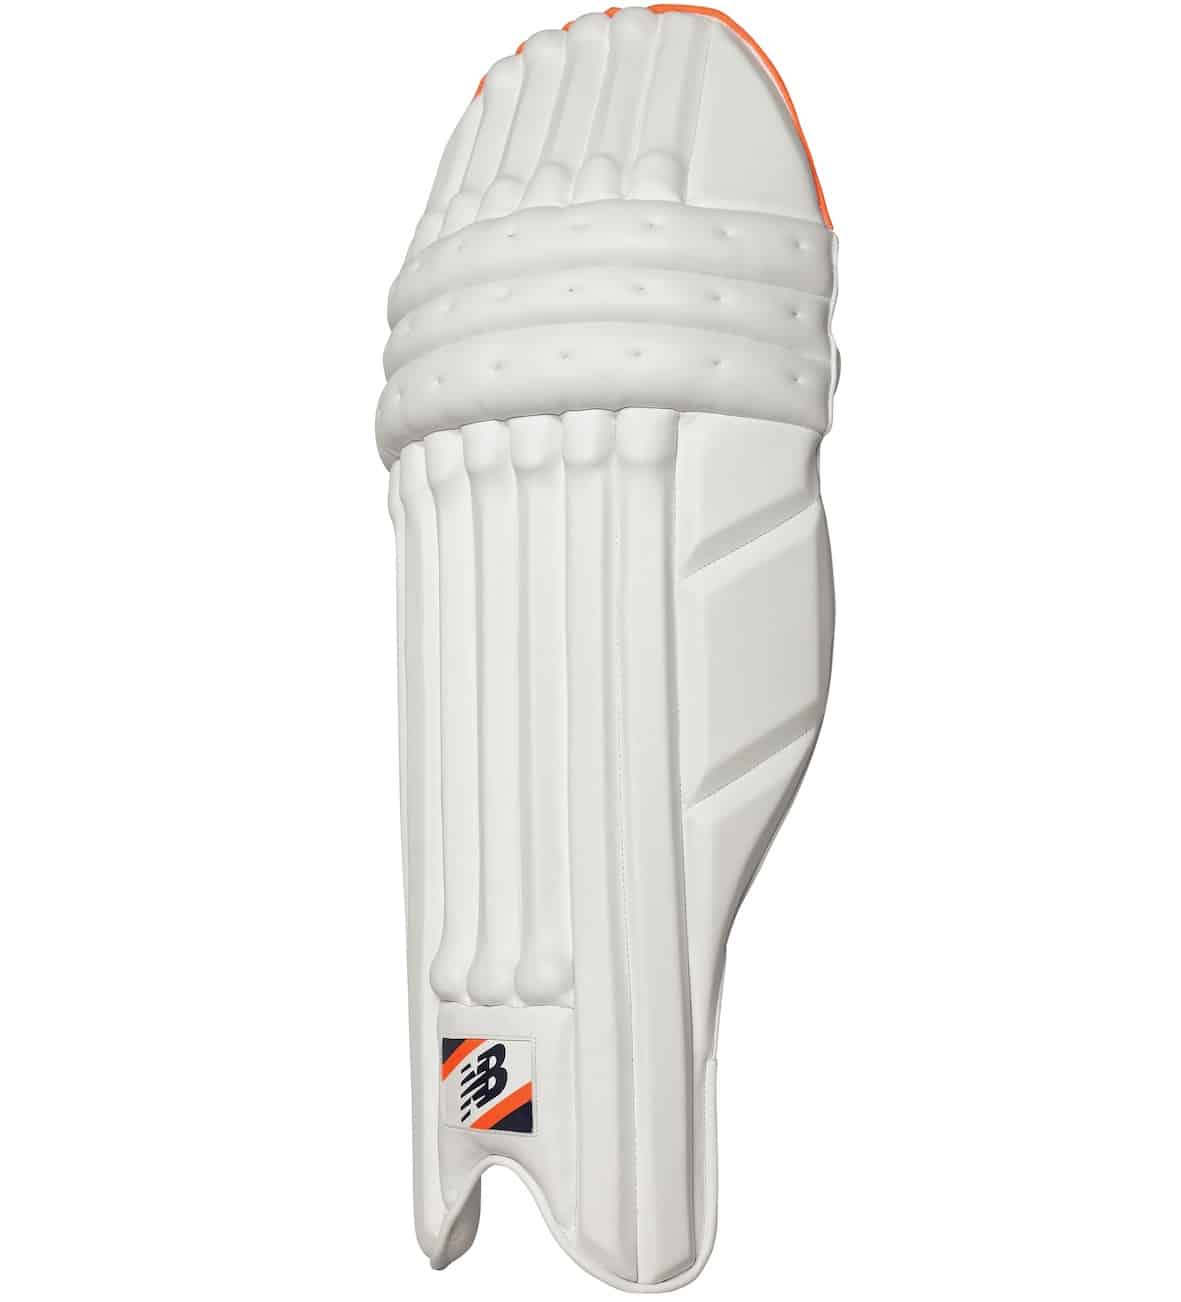 Details about   NB DC 680 EXCLUSIVE CRICKET BATTING PADS Mens Senior Size RH Free Shipping 